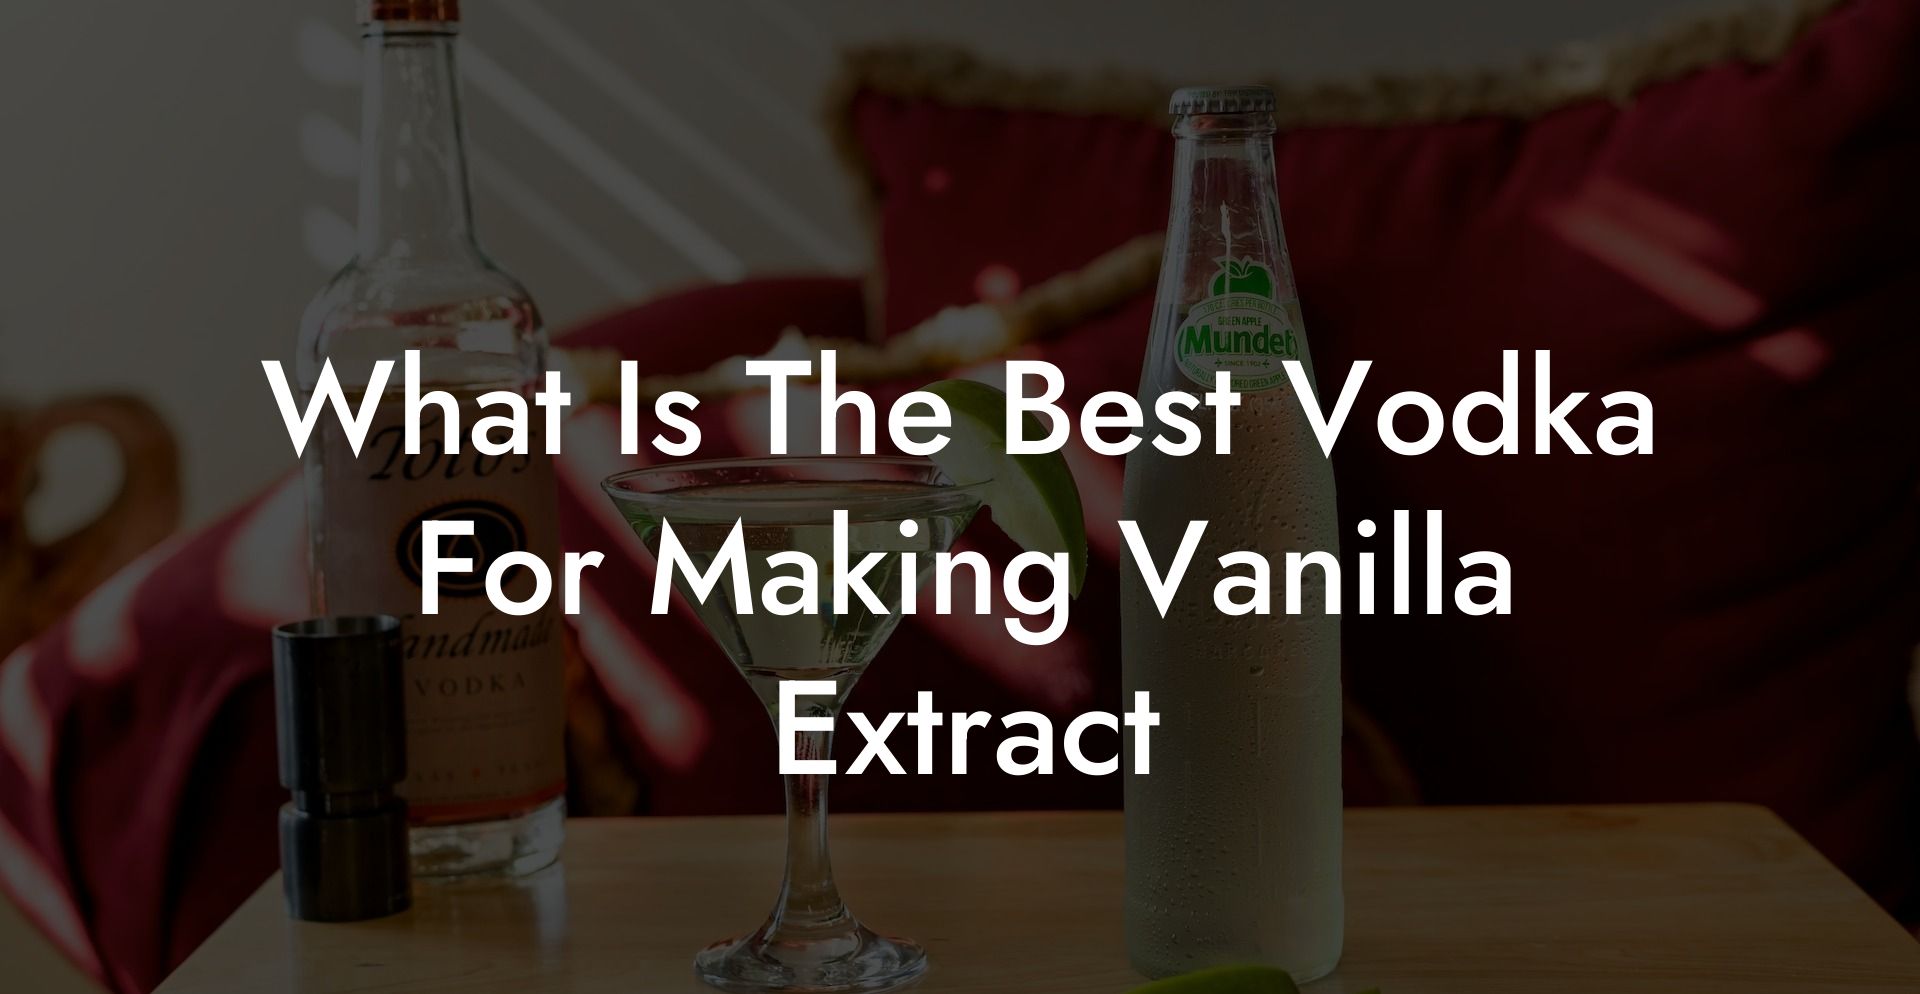 What Is The Best Vodka For Making Vanilla Extract